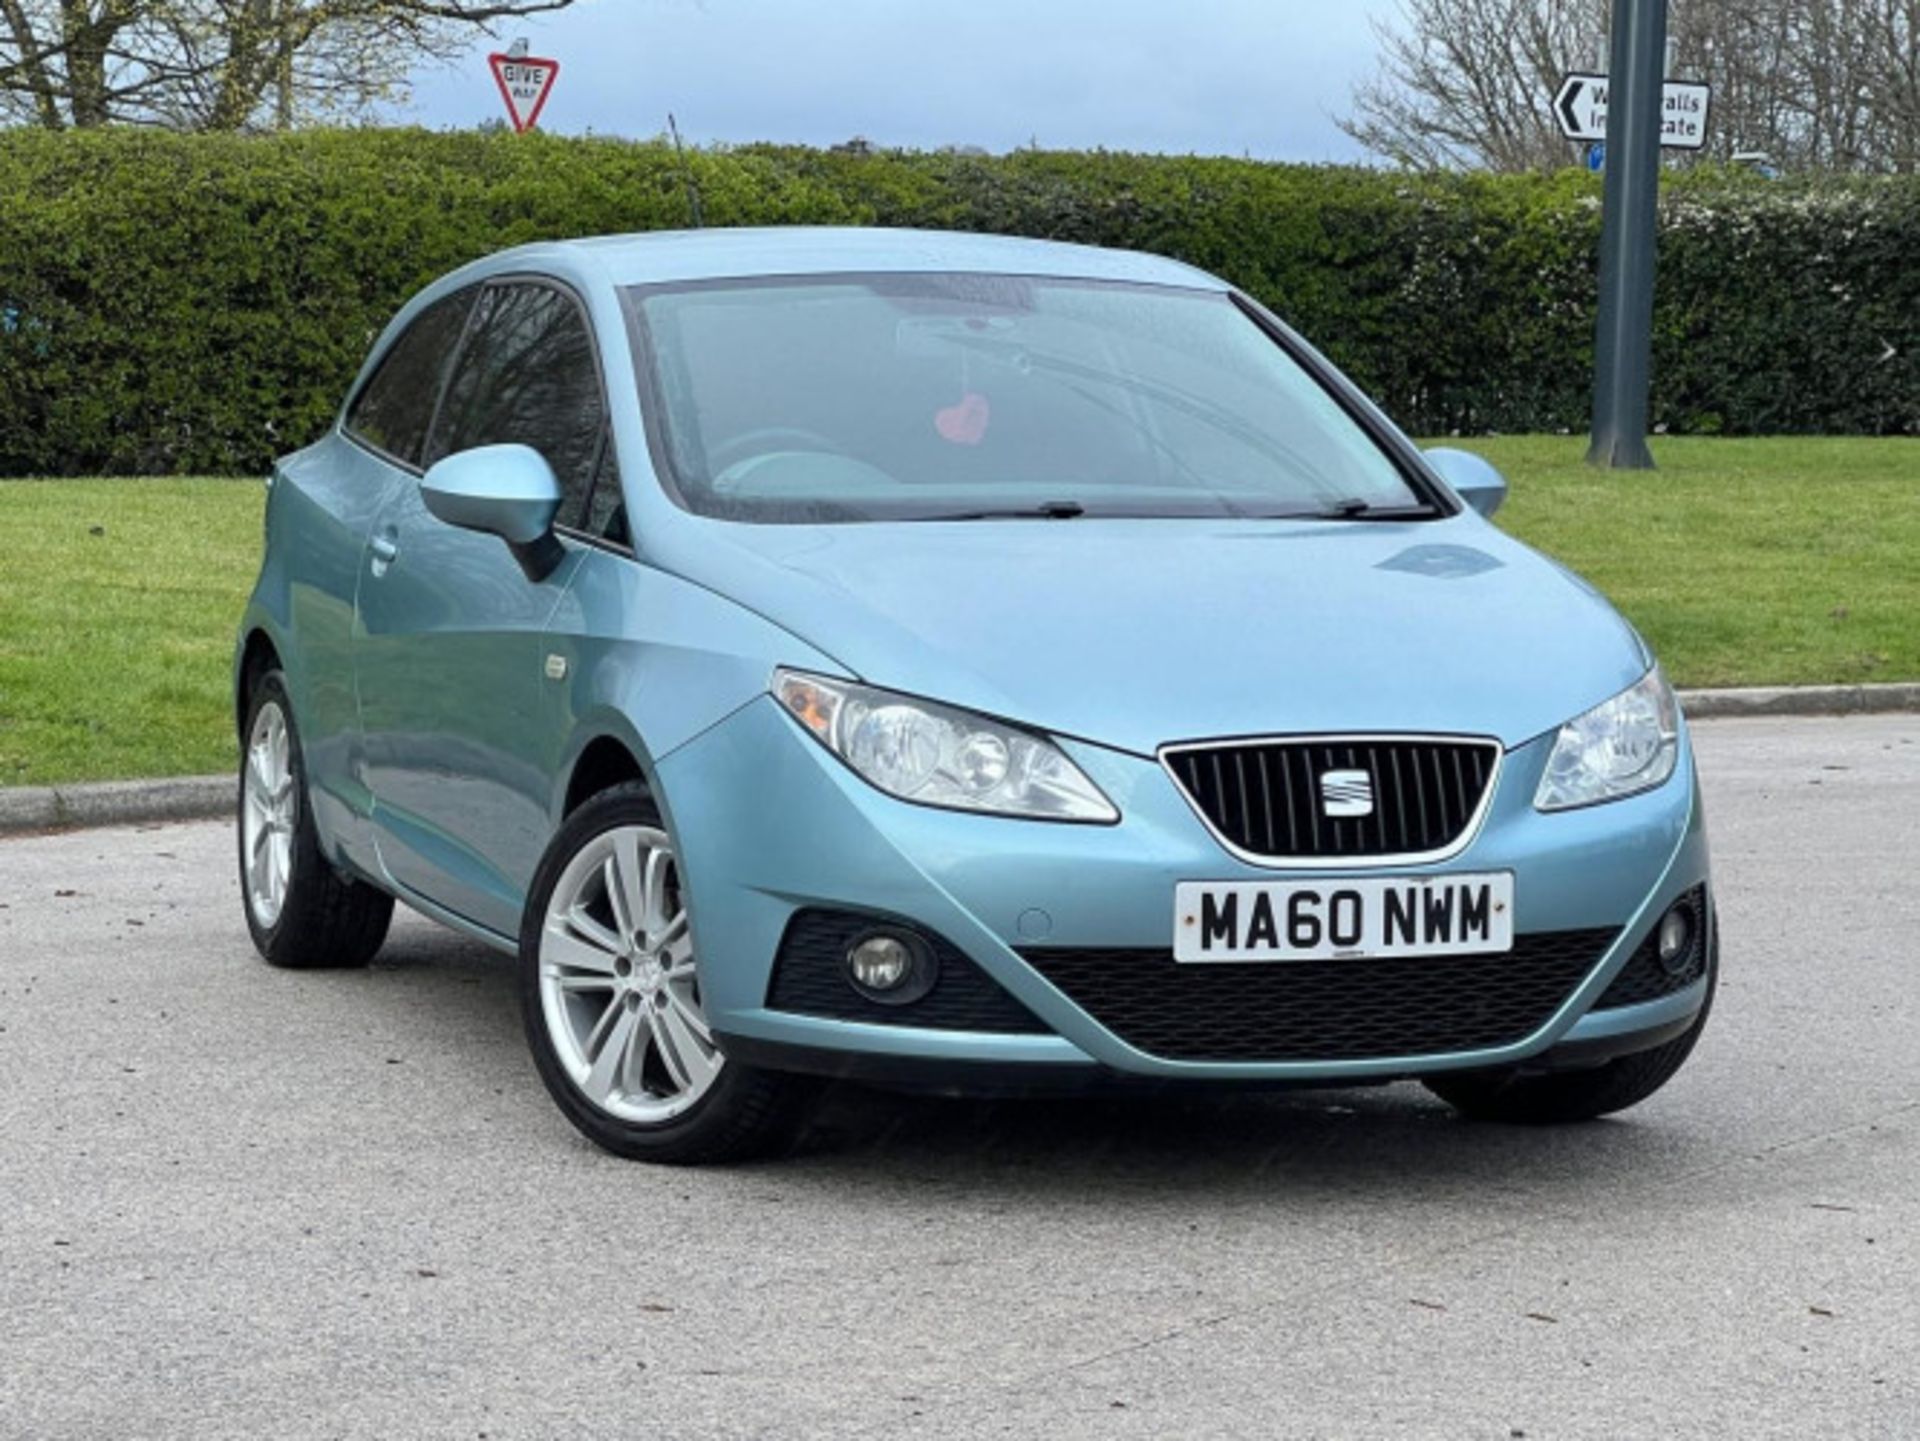 2010 SEAT IBIZA SE SPORT COUPE **(ONLY 64K MILEAGE)** >>--NO VAT ON HAMMER--<<